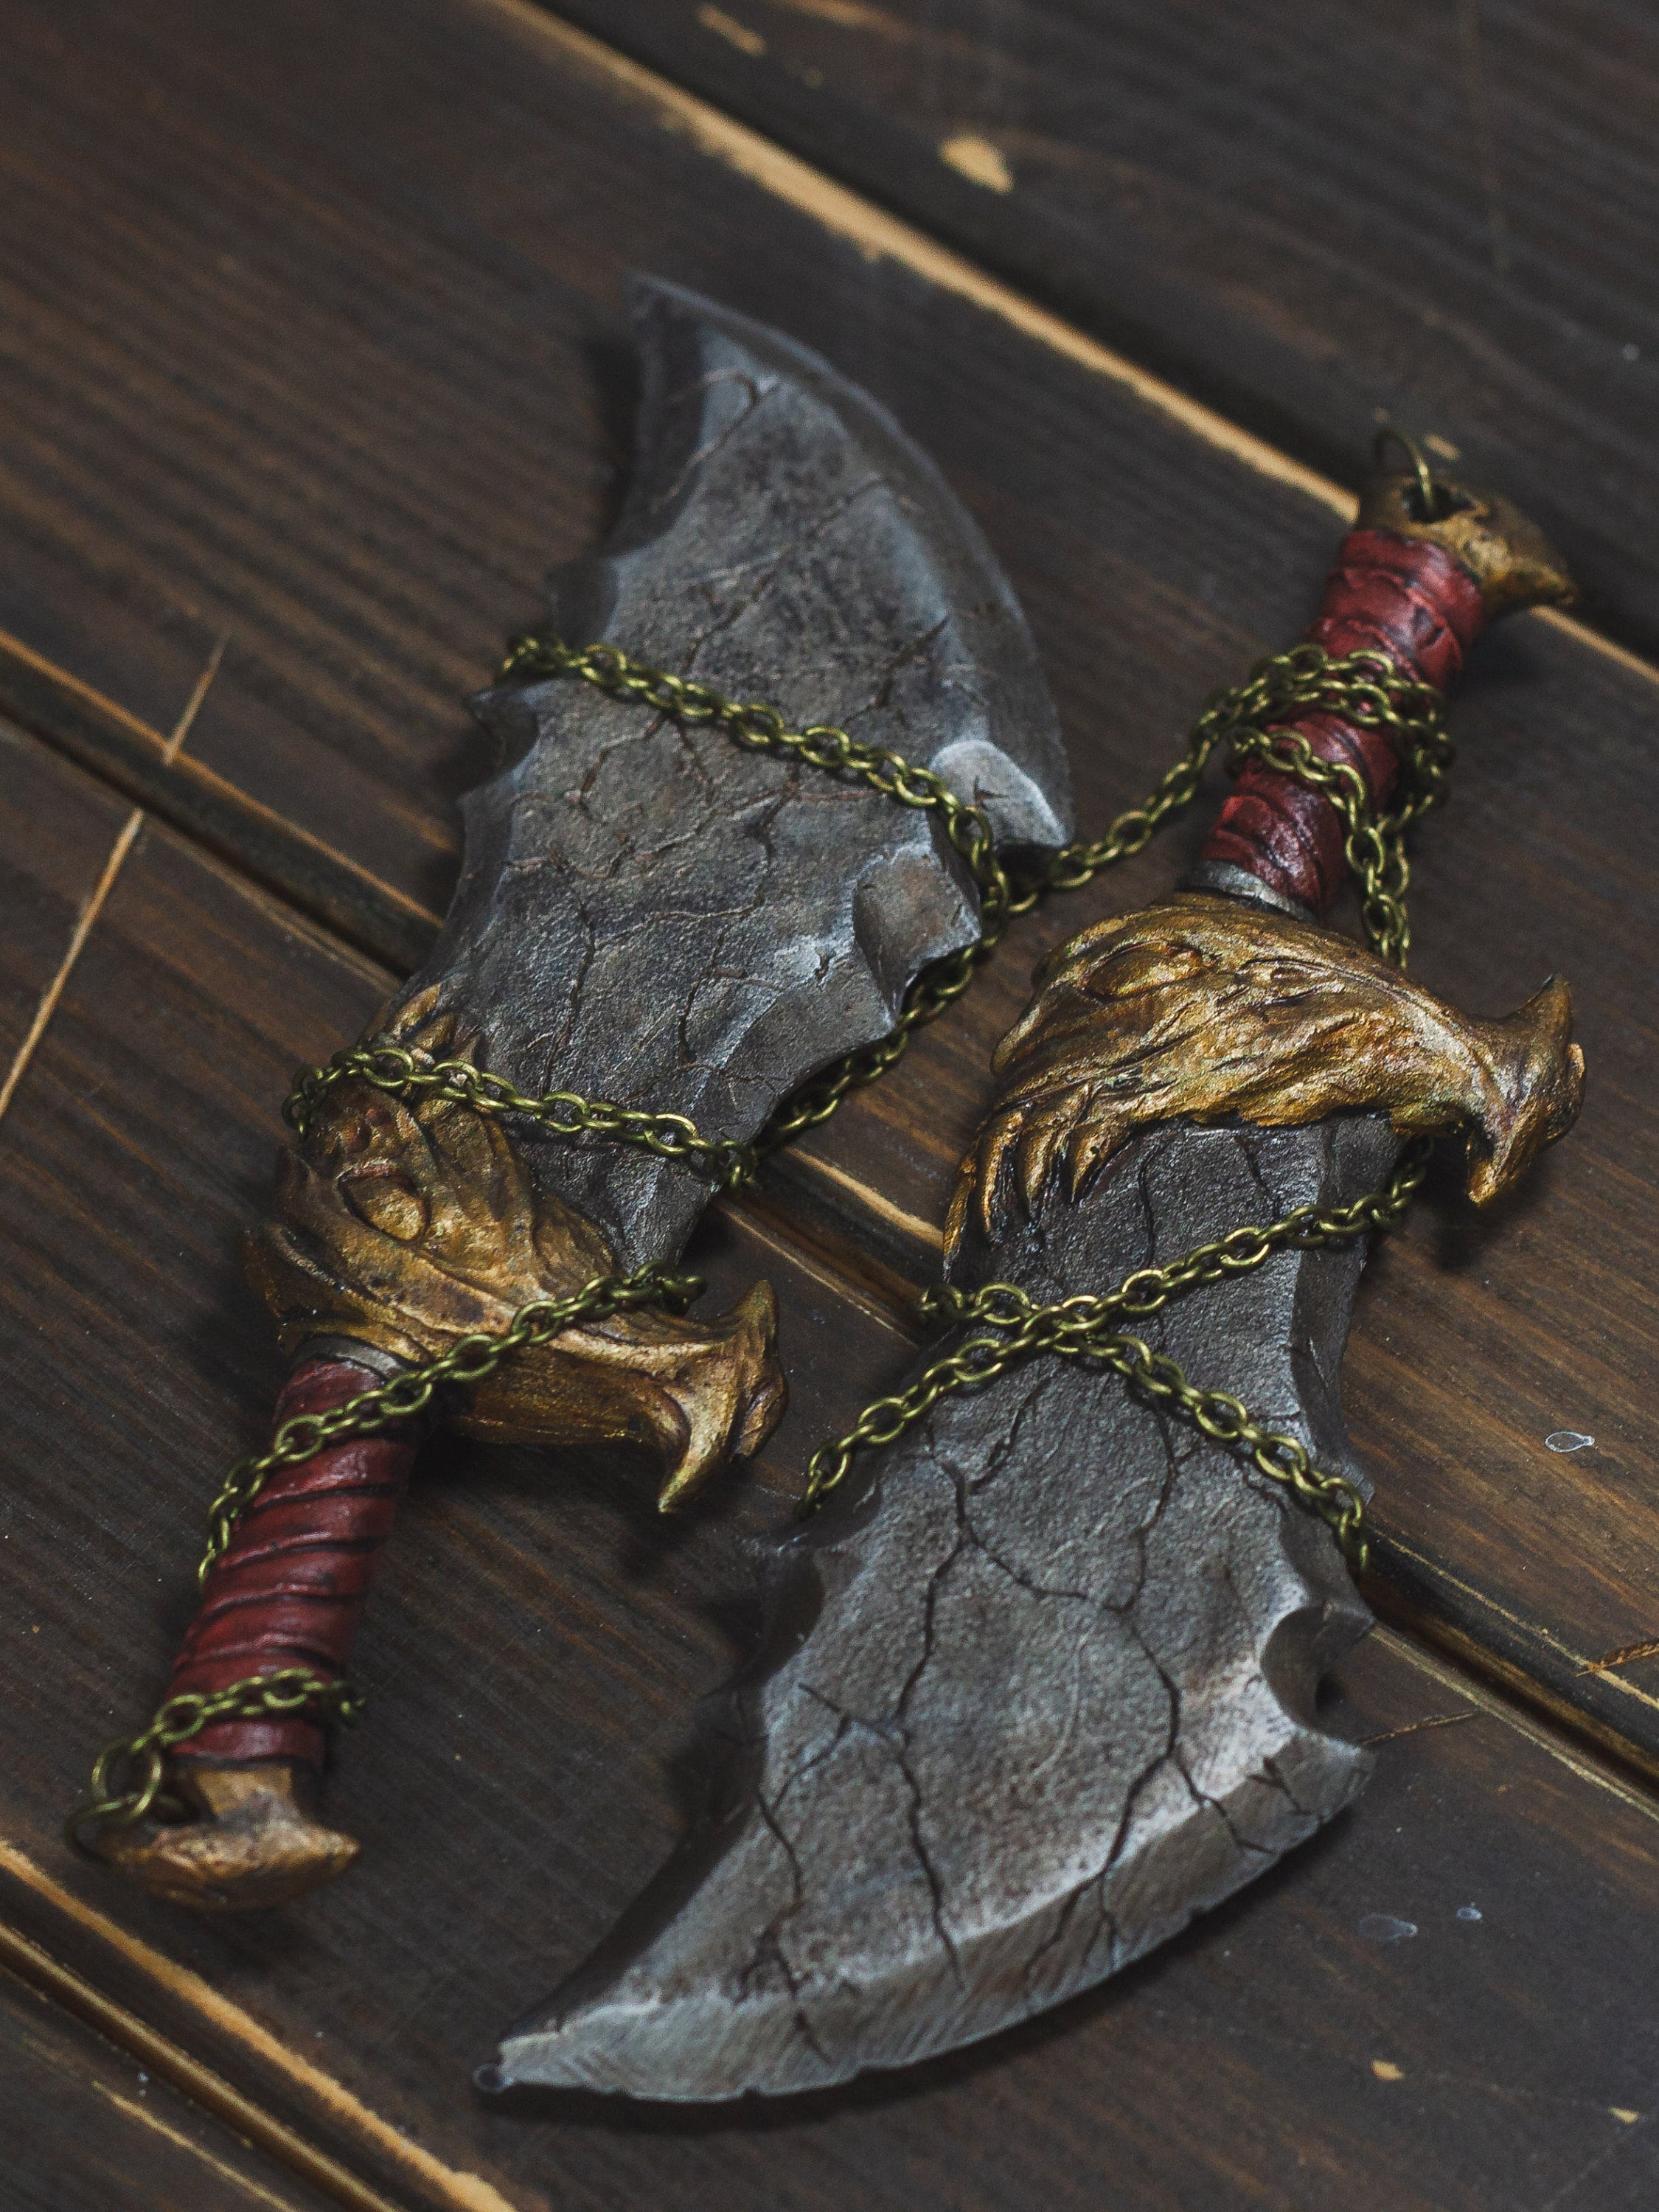 God of War Ragnarok Kratos The Blades of Chaos Leviathan Axe Blade of  Olympus Keychain Necklace Game Cosplay Accessories Jewelry